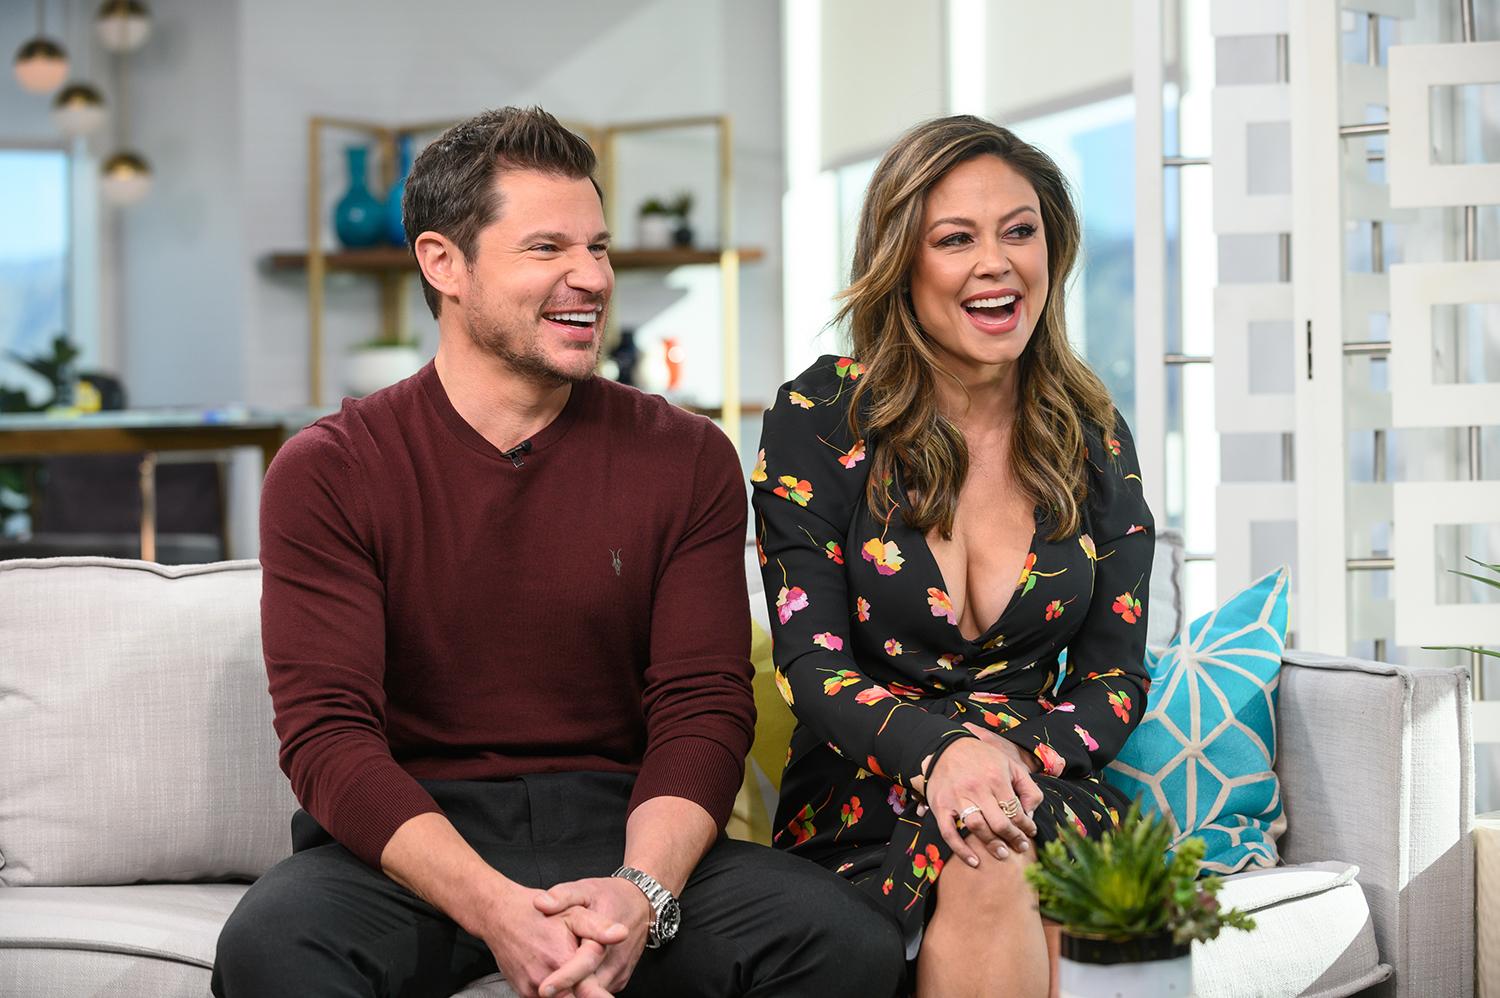 Image from On Set - Nick Lachey and Vanessa Lachey / E! Daily Pop